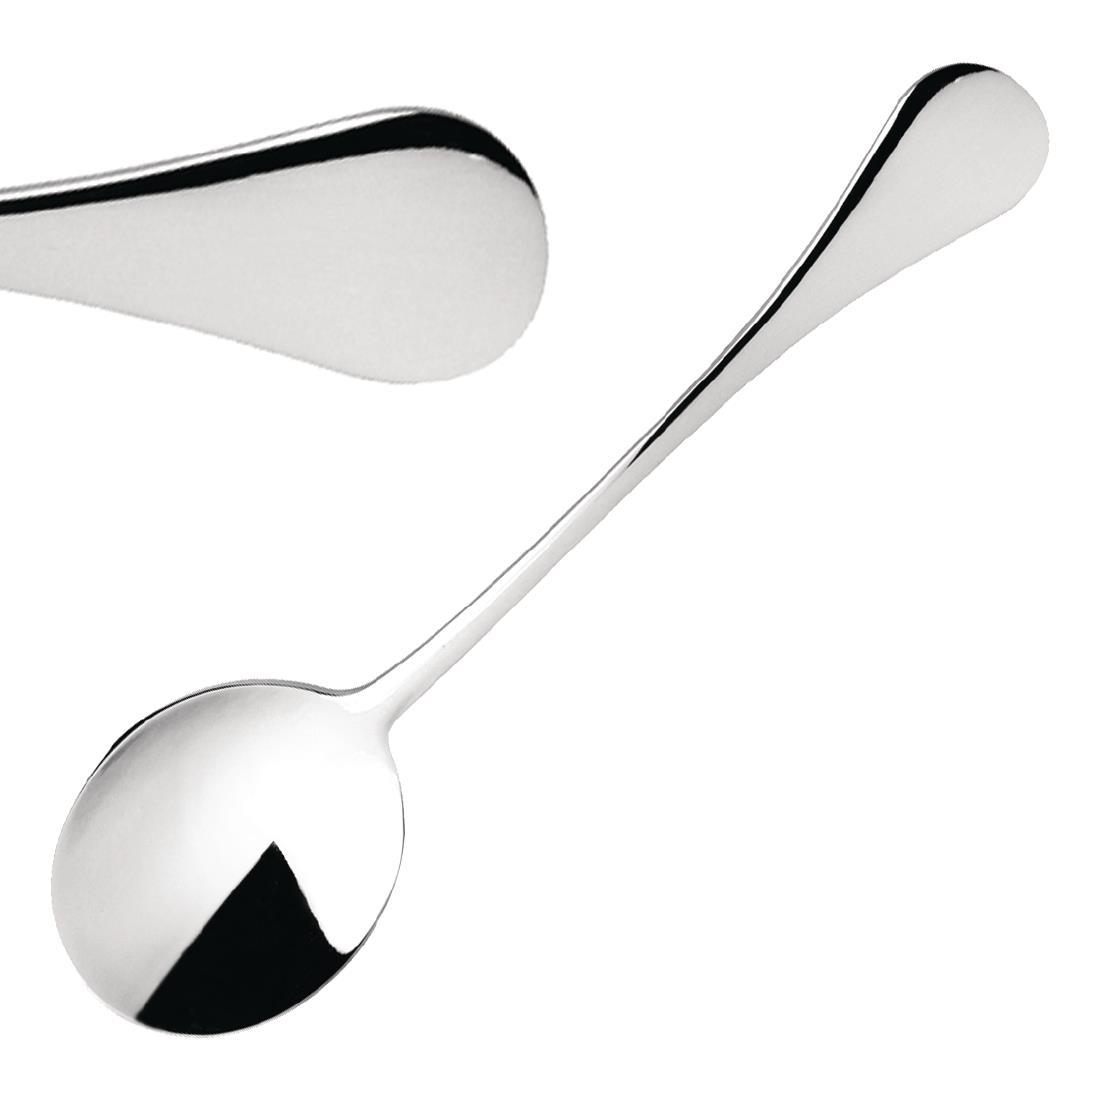 Olympia Paganini Soup spoon (Pack of 12) - GM457  - 1